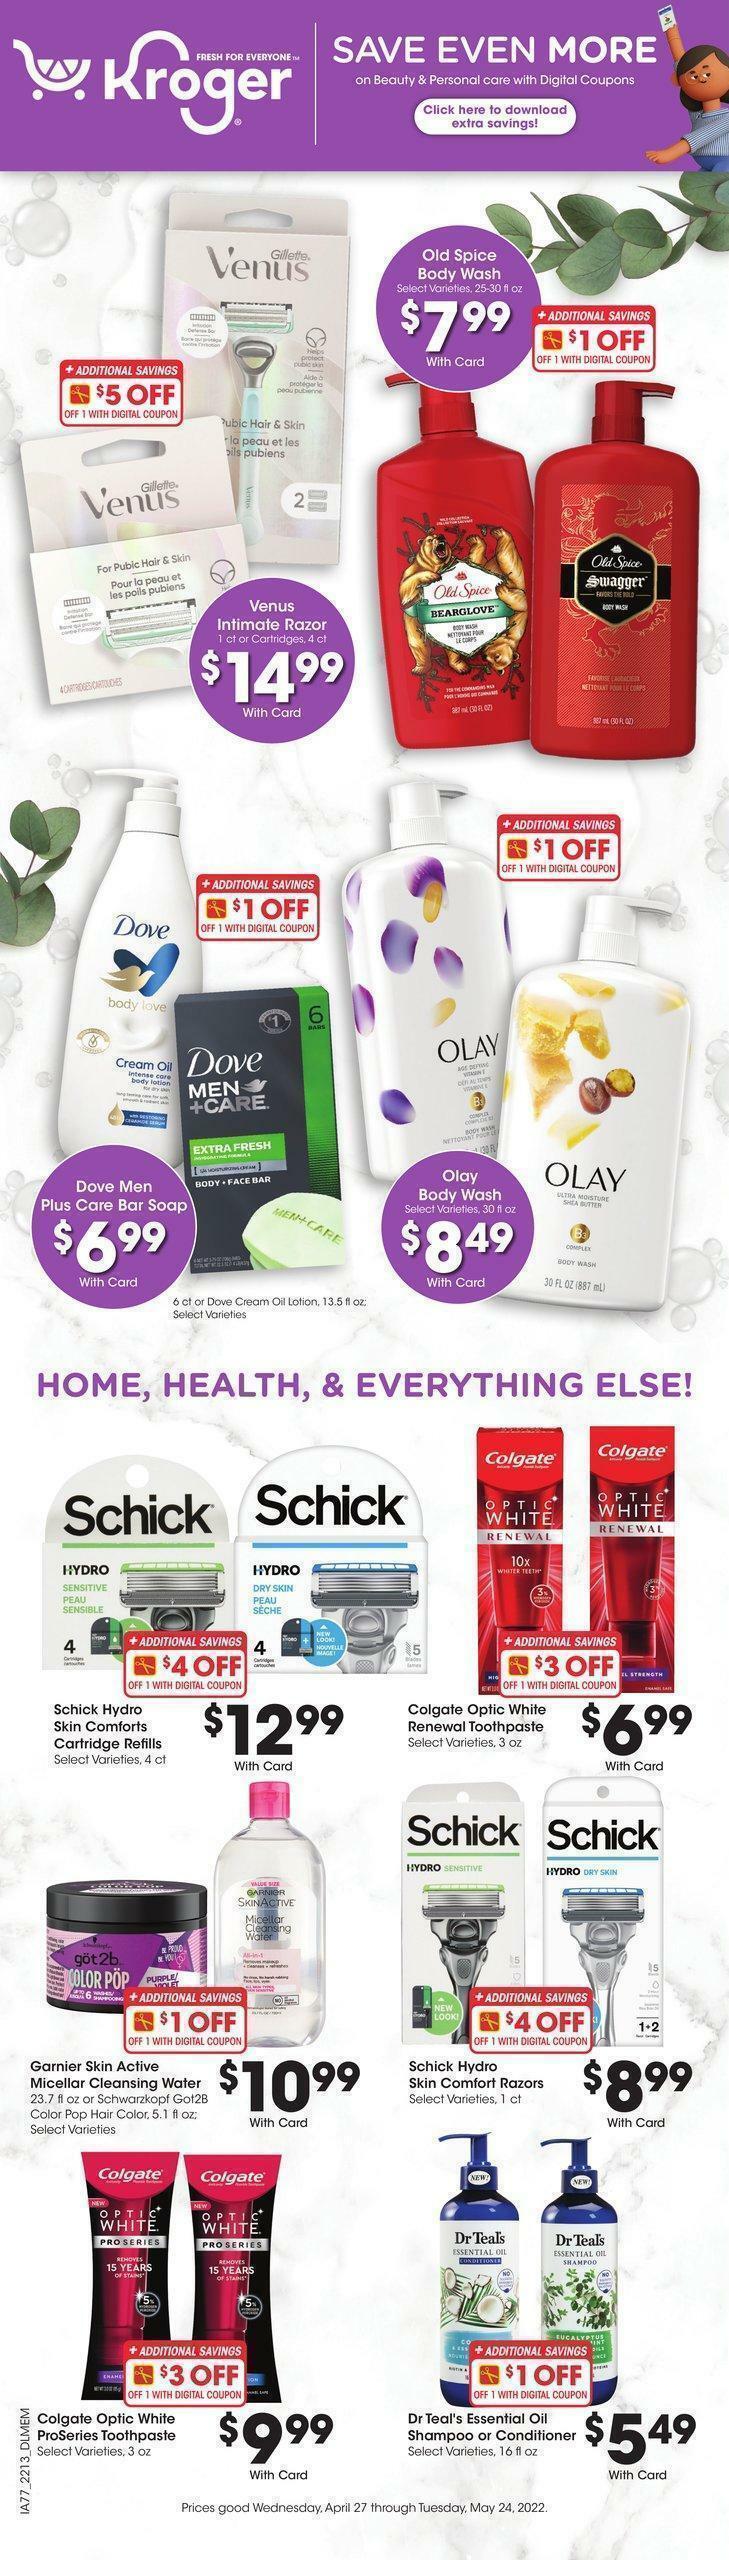 Kroger Beauty & Personal Care Savings Weekly Ad from April 27